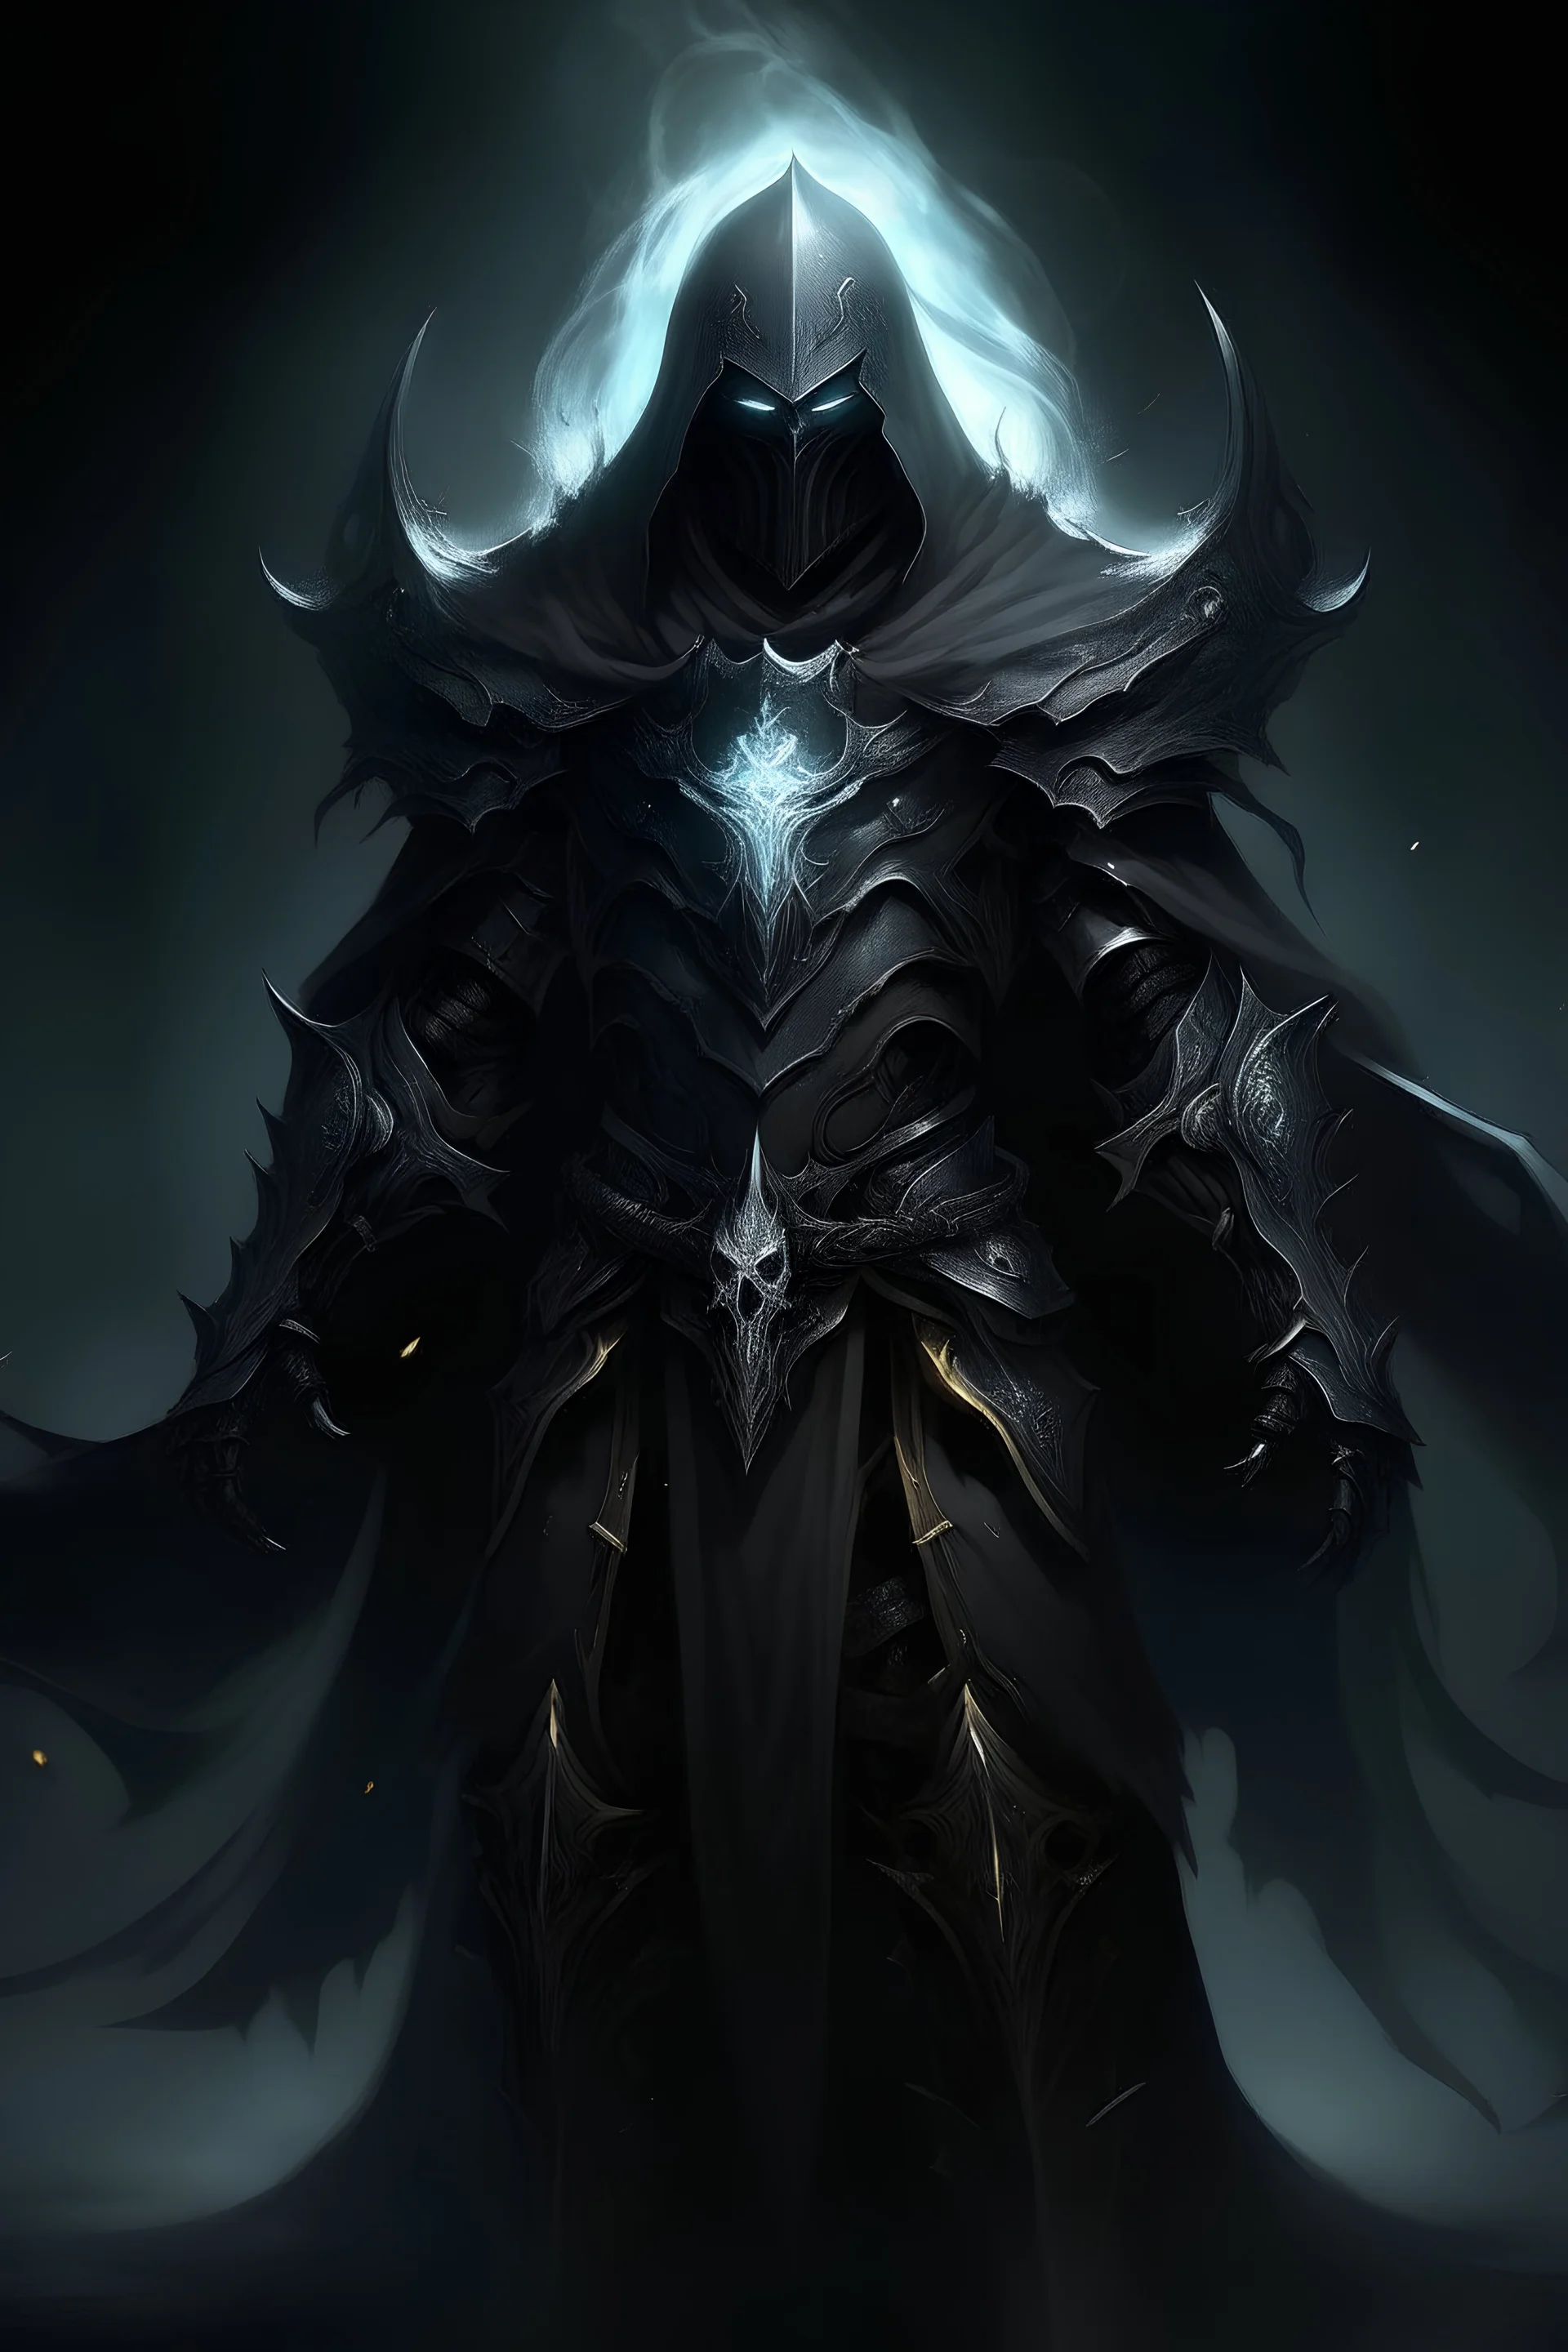 Dark fantasy knight with pale skin and glowing eyes in black armor with a billowing spectral cloak